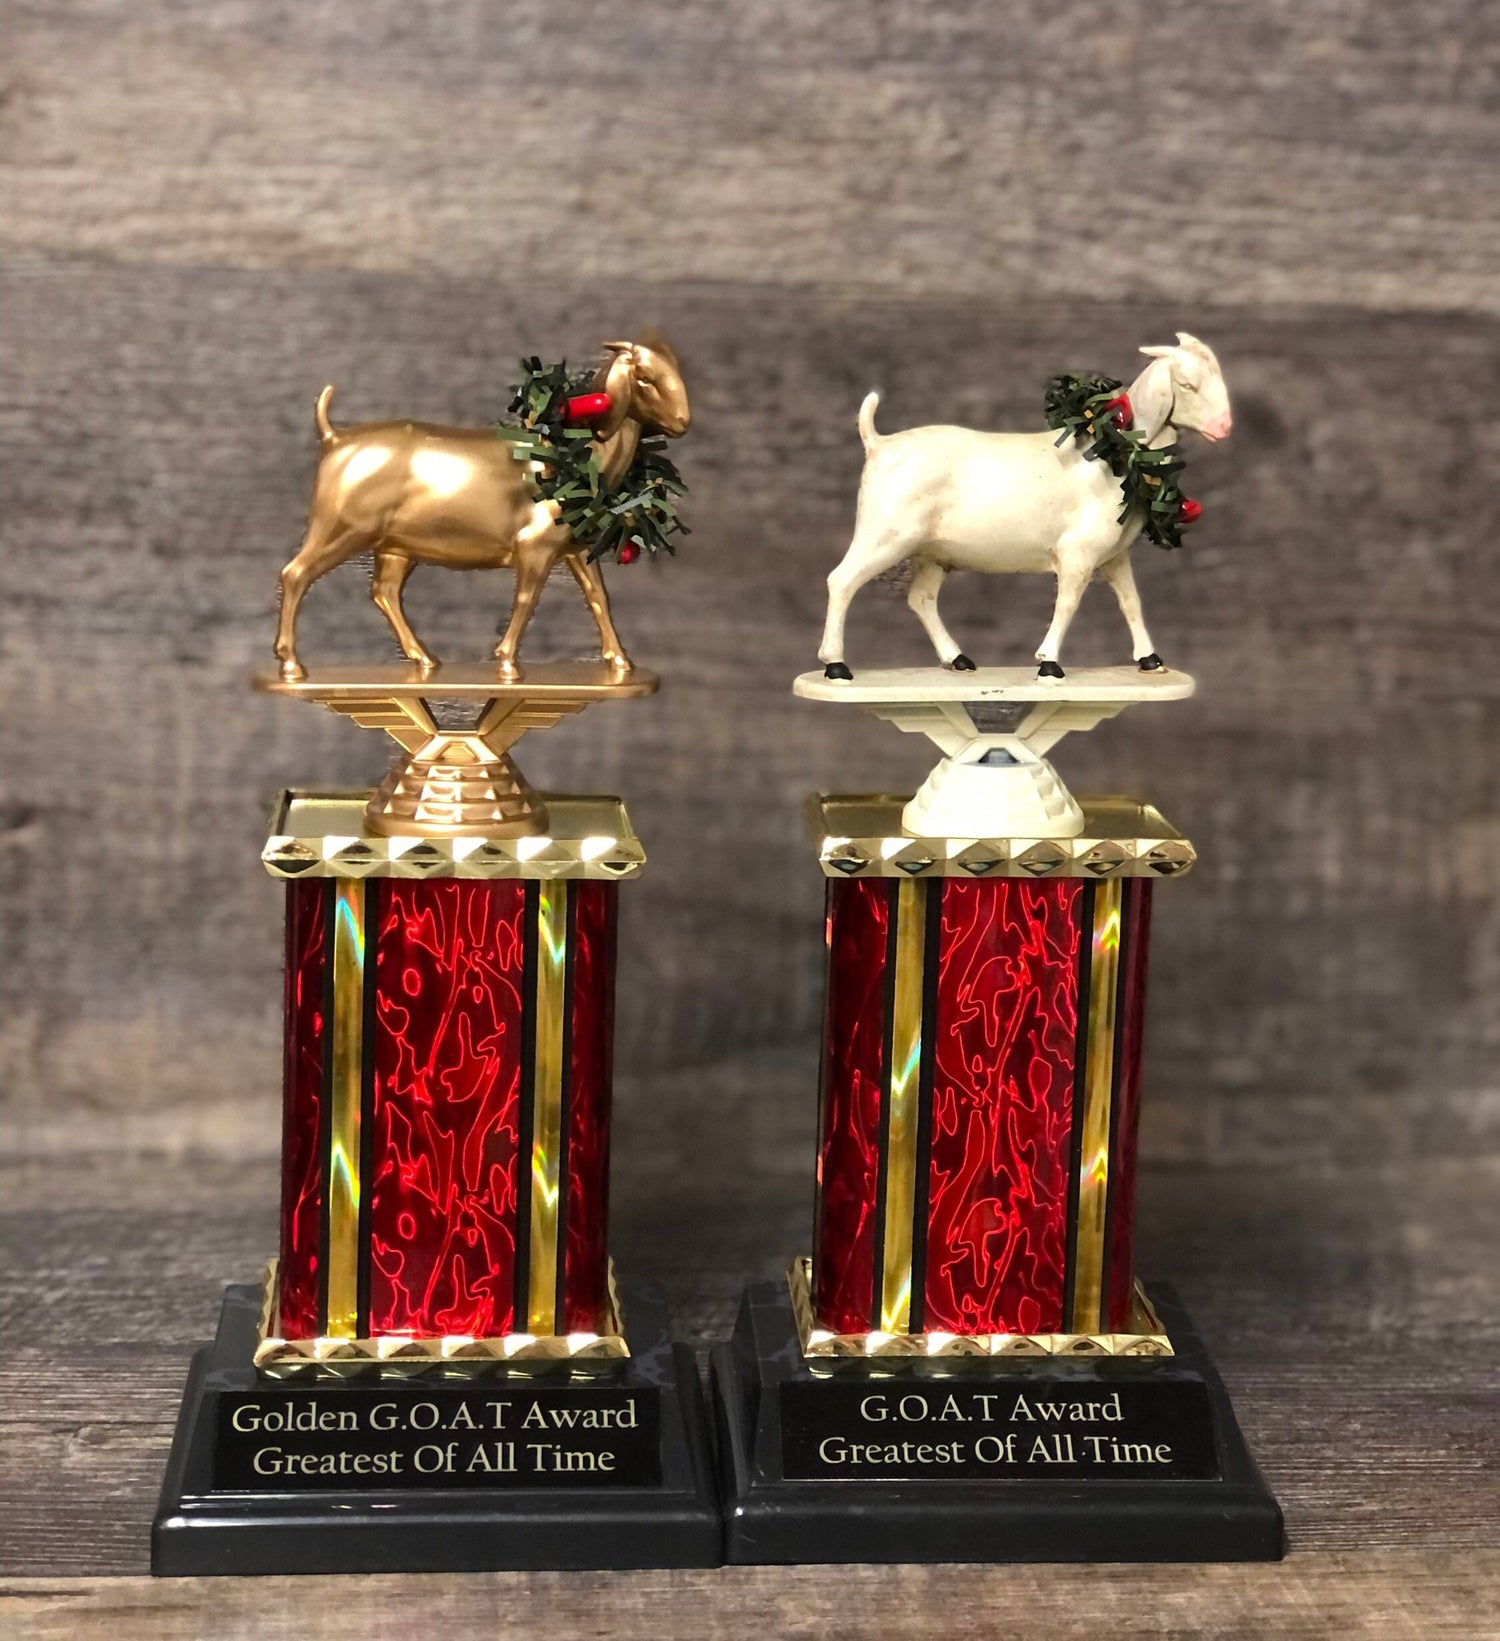 GOLDEN GOAT Trophy Greatest of All Time Corporate Award Trophy Employee Of The Month Top Sales Motivational Achievement Award Personalized